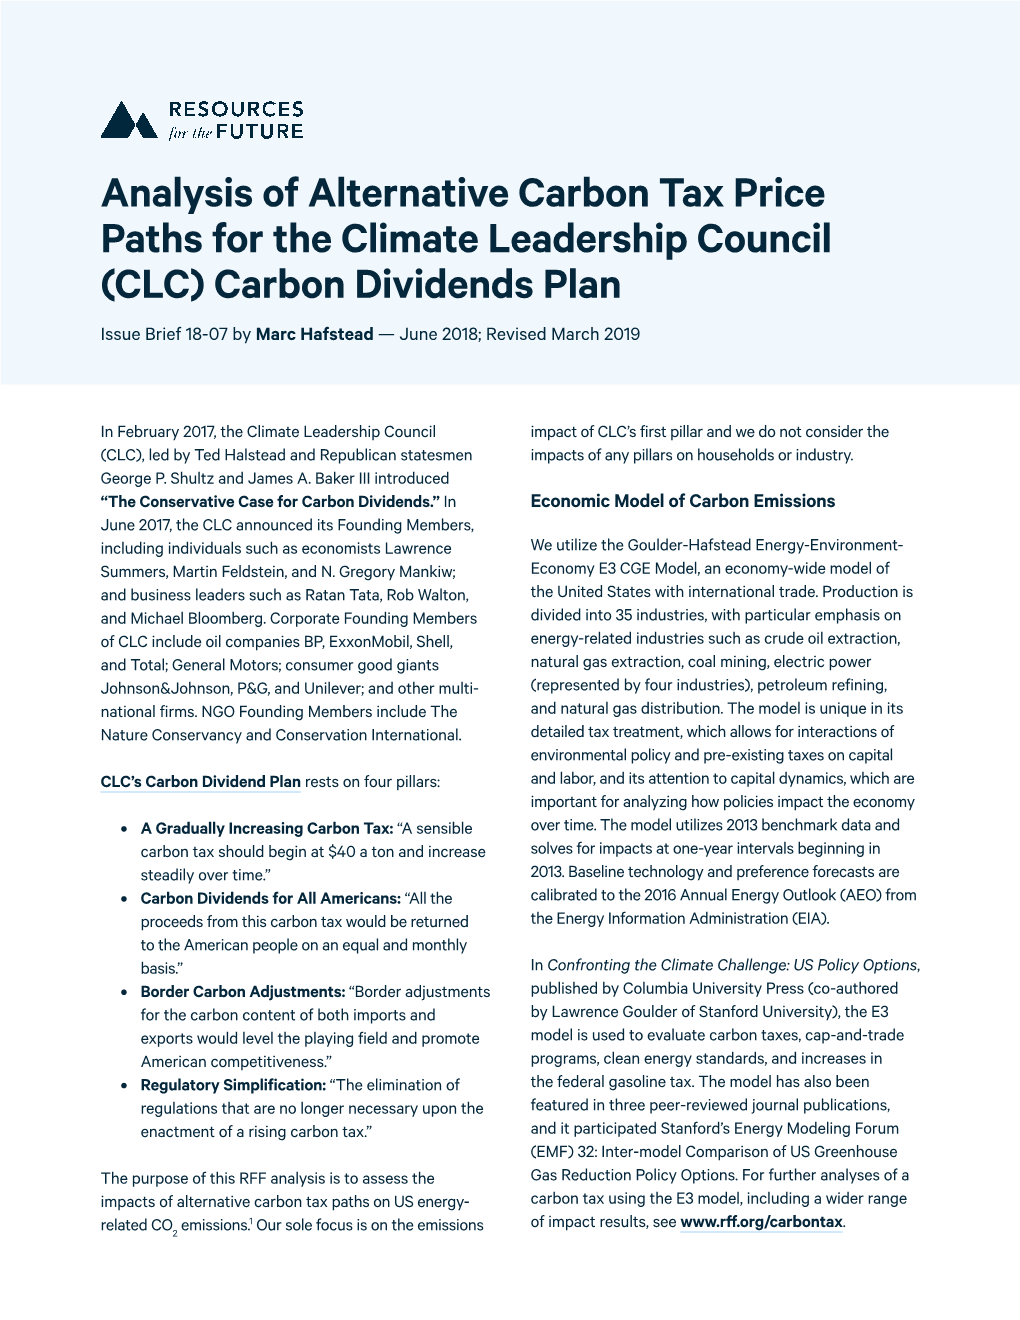 Analysis of Alternative Carbon Tax Price Paths for the Climate